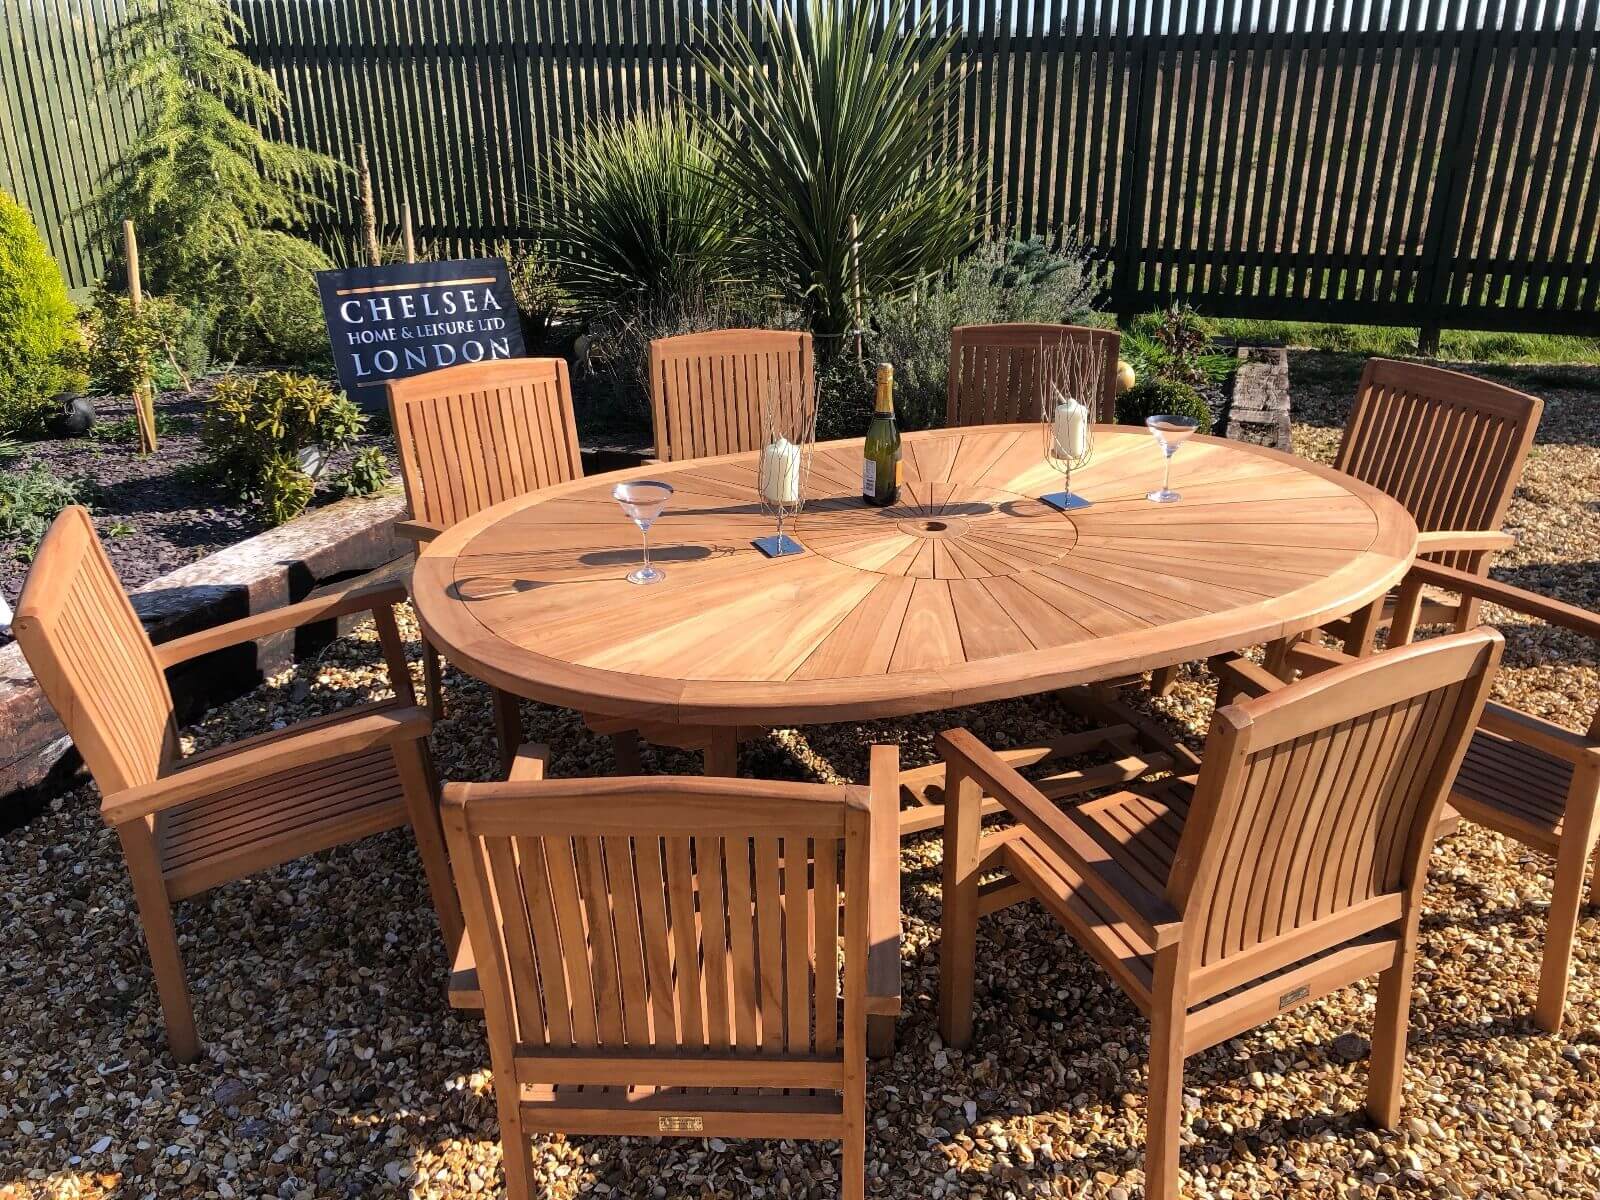 10 Reasons Why Teak Furniture Is The Best Choice For Your Outdoor Living Space